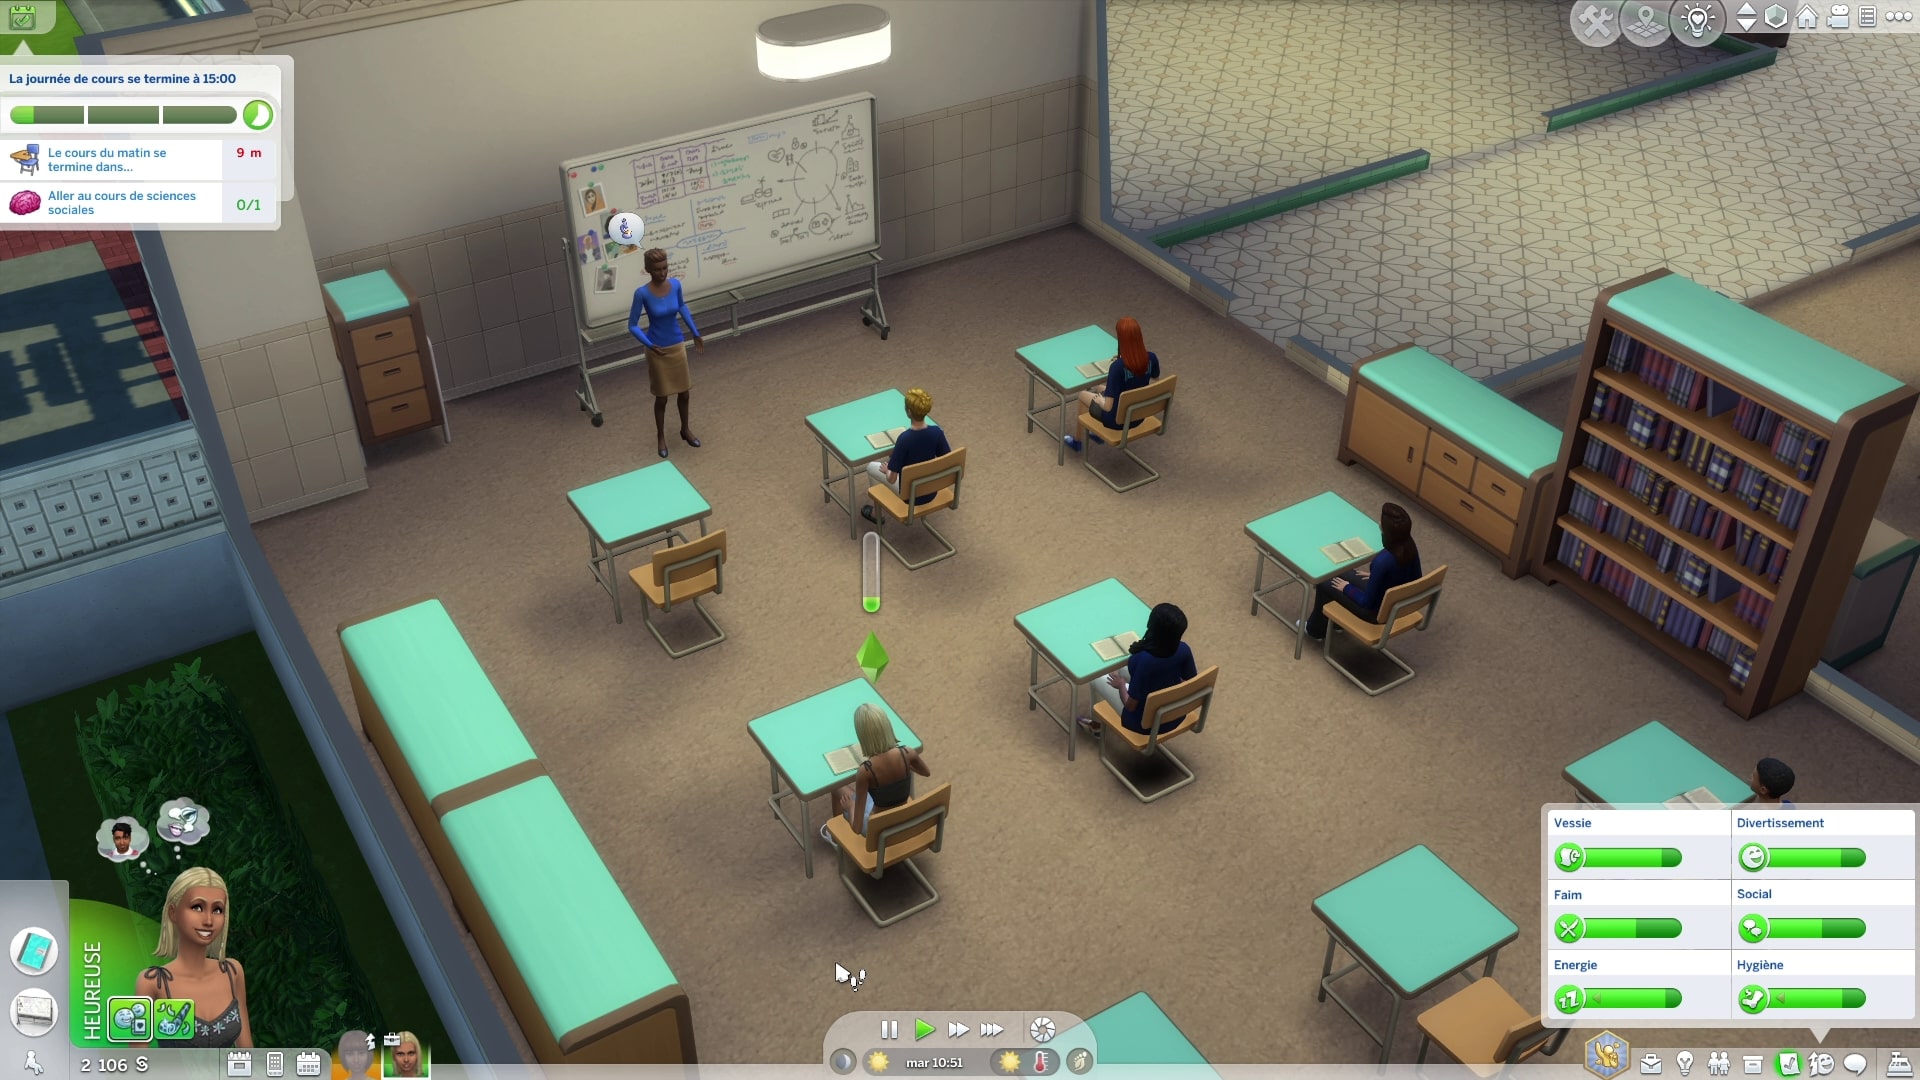 Les sims 4 annees lycee 2